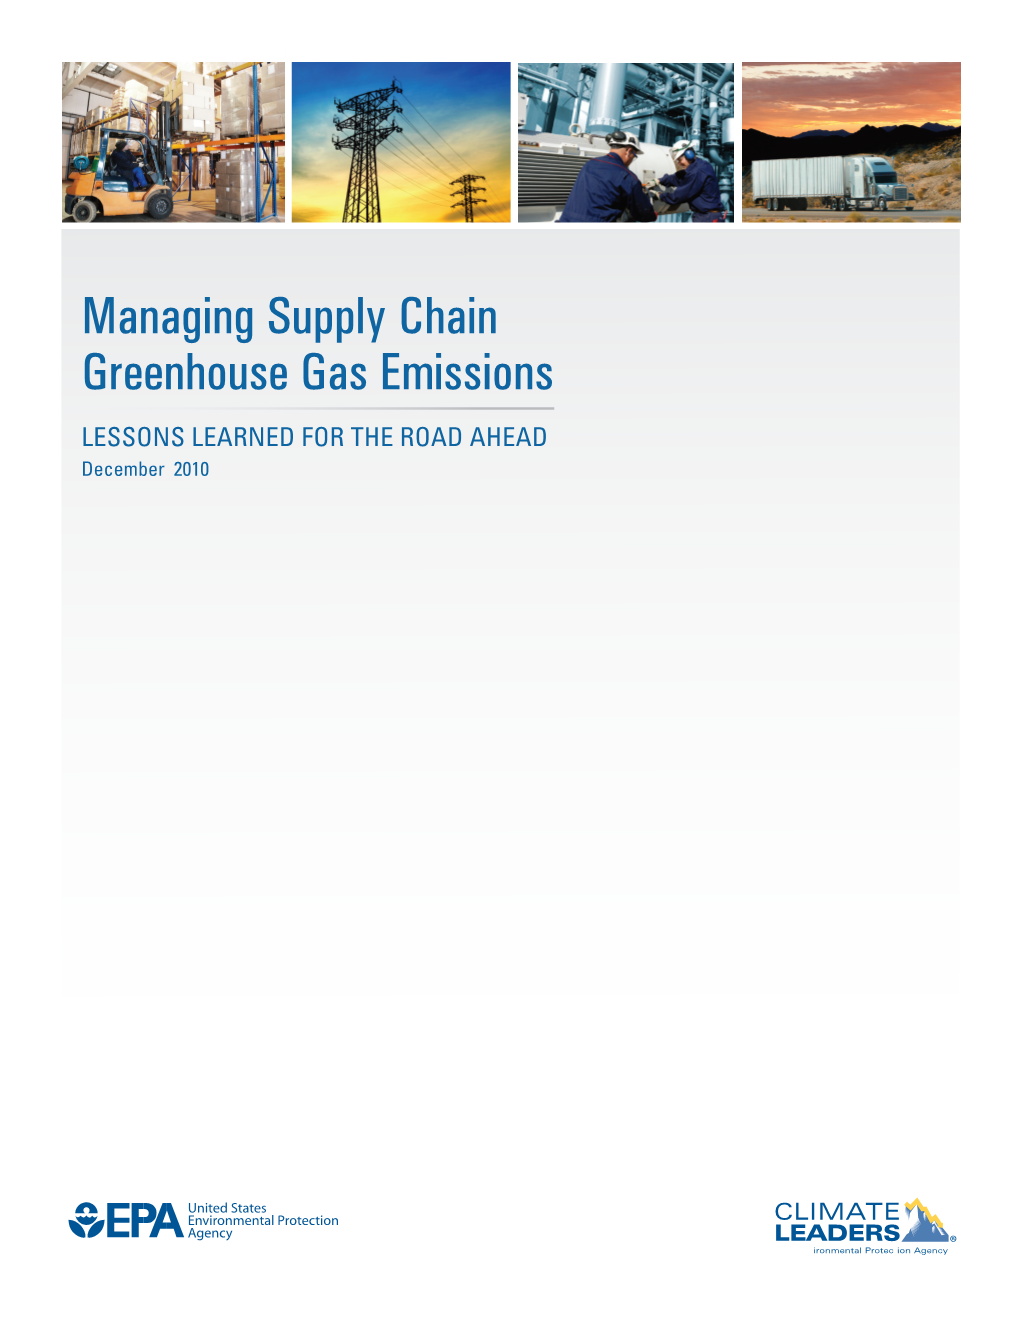 Managing Supply Chain Greenhouse Gas Emissions Lessons Learned for the Road Ahead December 2010